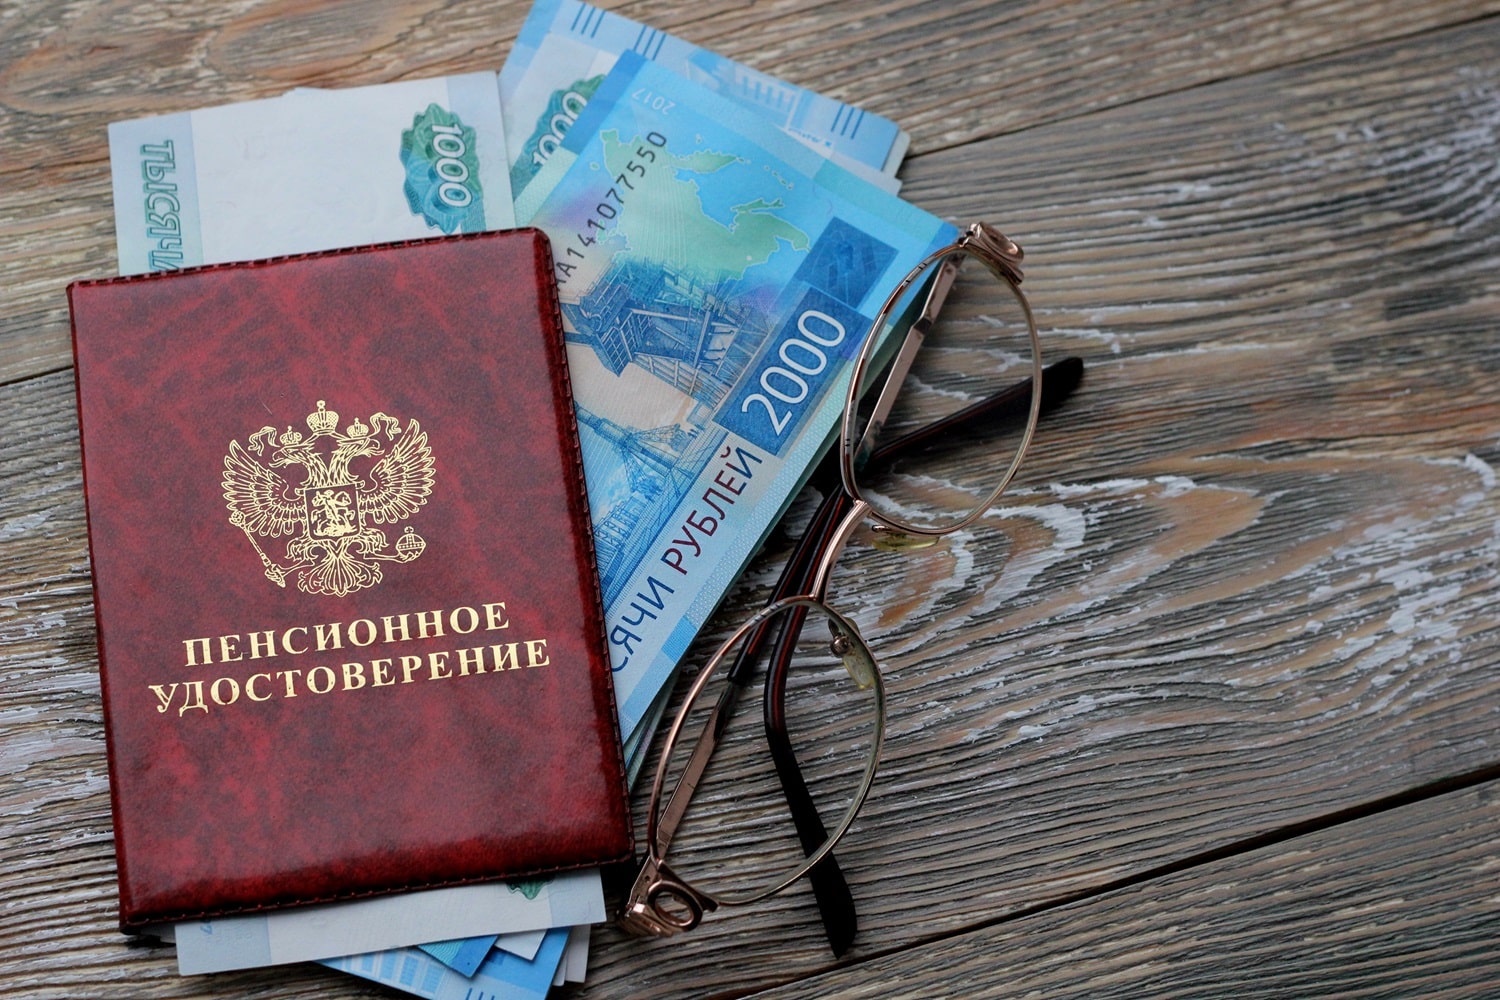 Russian banknotes, a Russian pension book, and a pair of glasses on a wooden background.